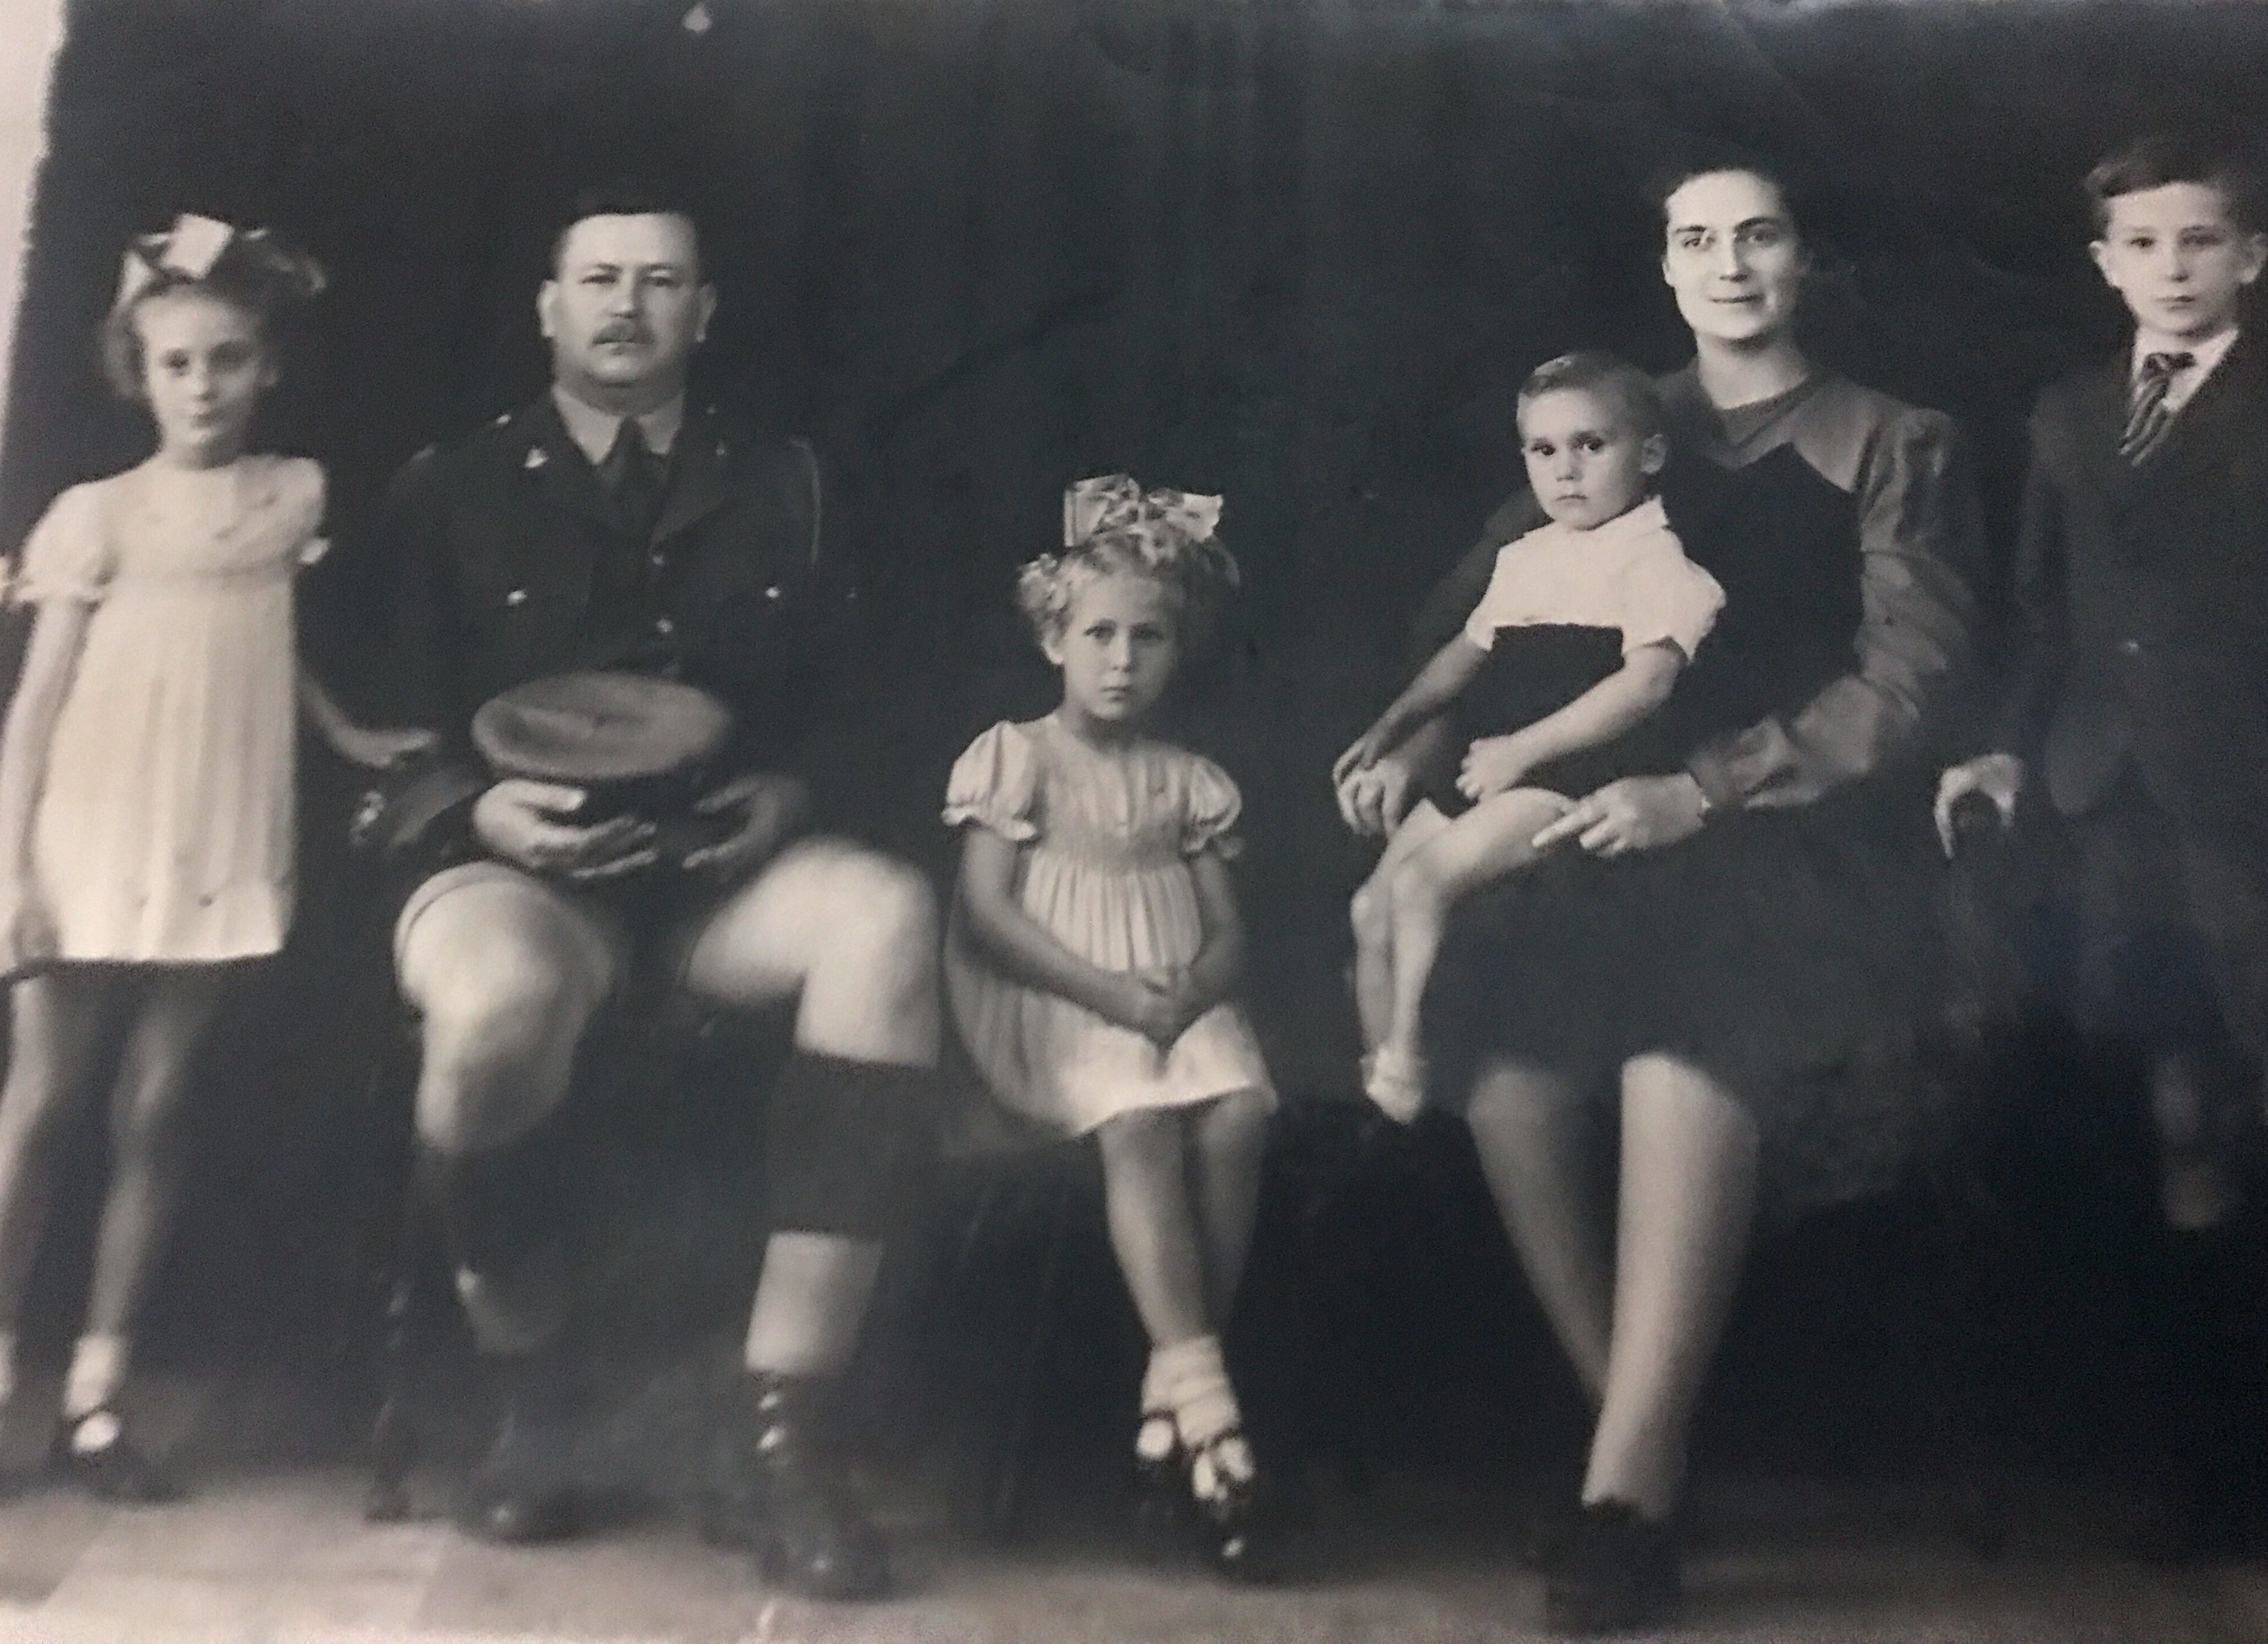 My Grand father - Hannes C Ras  being a sargent in  World War 2 Surviving with medals of Hounour With his family  My grandma   Ella Ras And thier 4 Children From L to R  My Mother Johanna Catharina (Rina) Sister Cornelia (Nelie Brother Martinus  Brother Wilhelm Foto taken  +_ 1945   